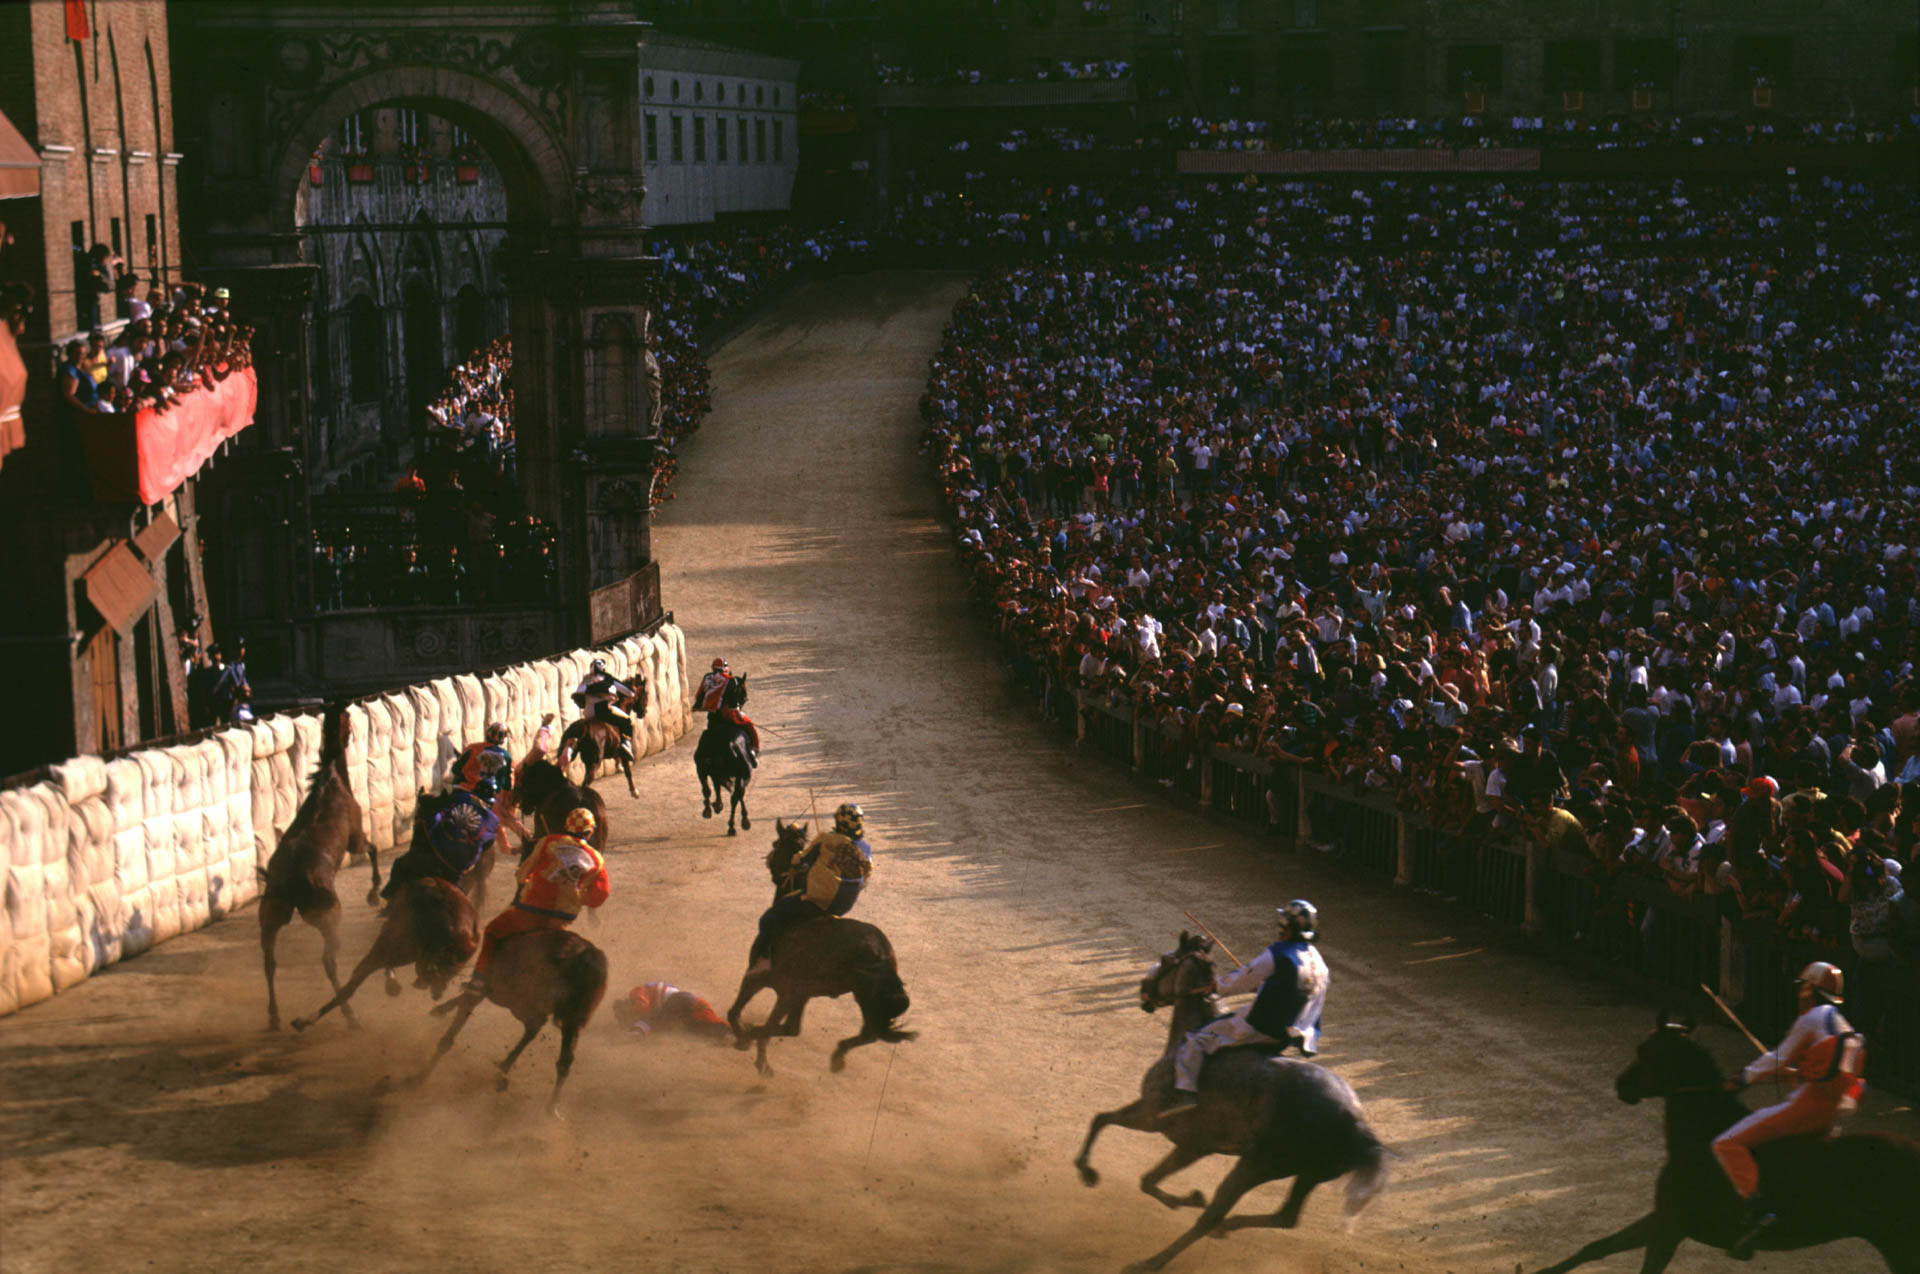  Siena, 1 July 1991 At the second S. Martino bend Chiocciola, Selva, Onda and Nicchio fall off their horses.&nbsp; 